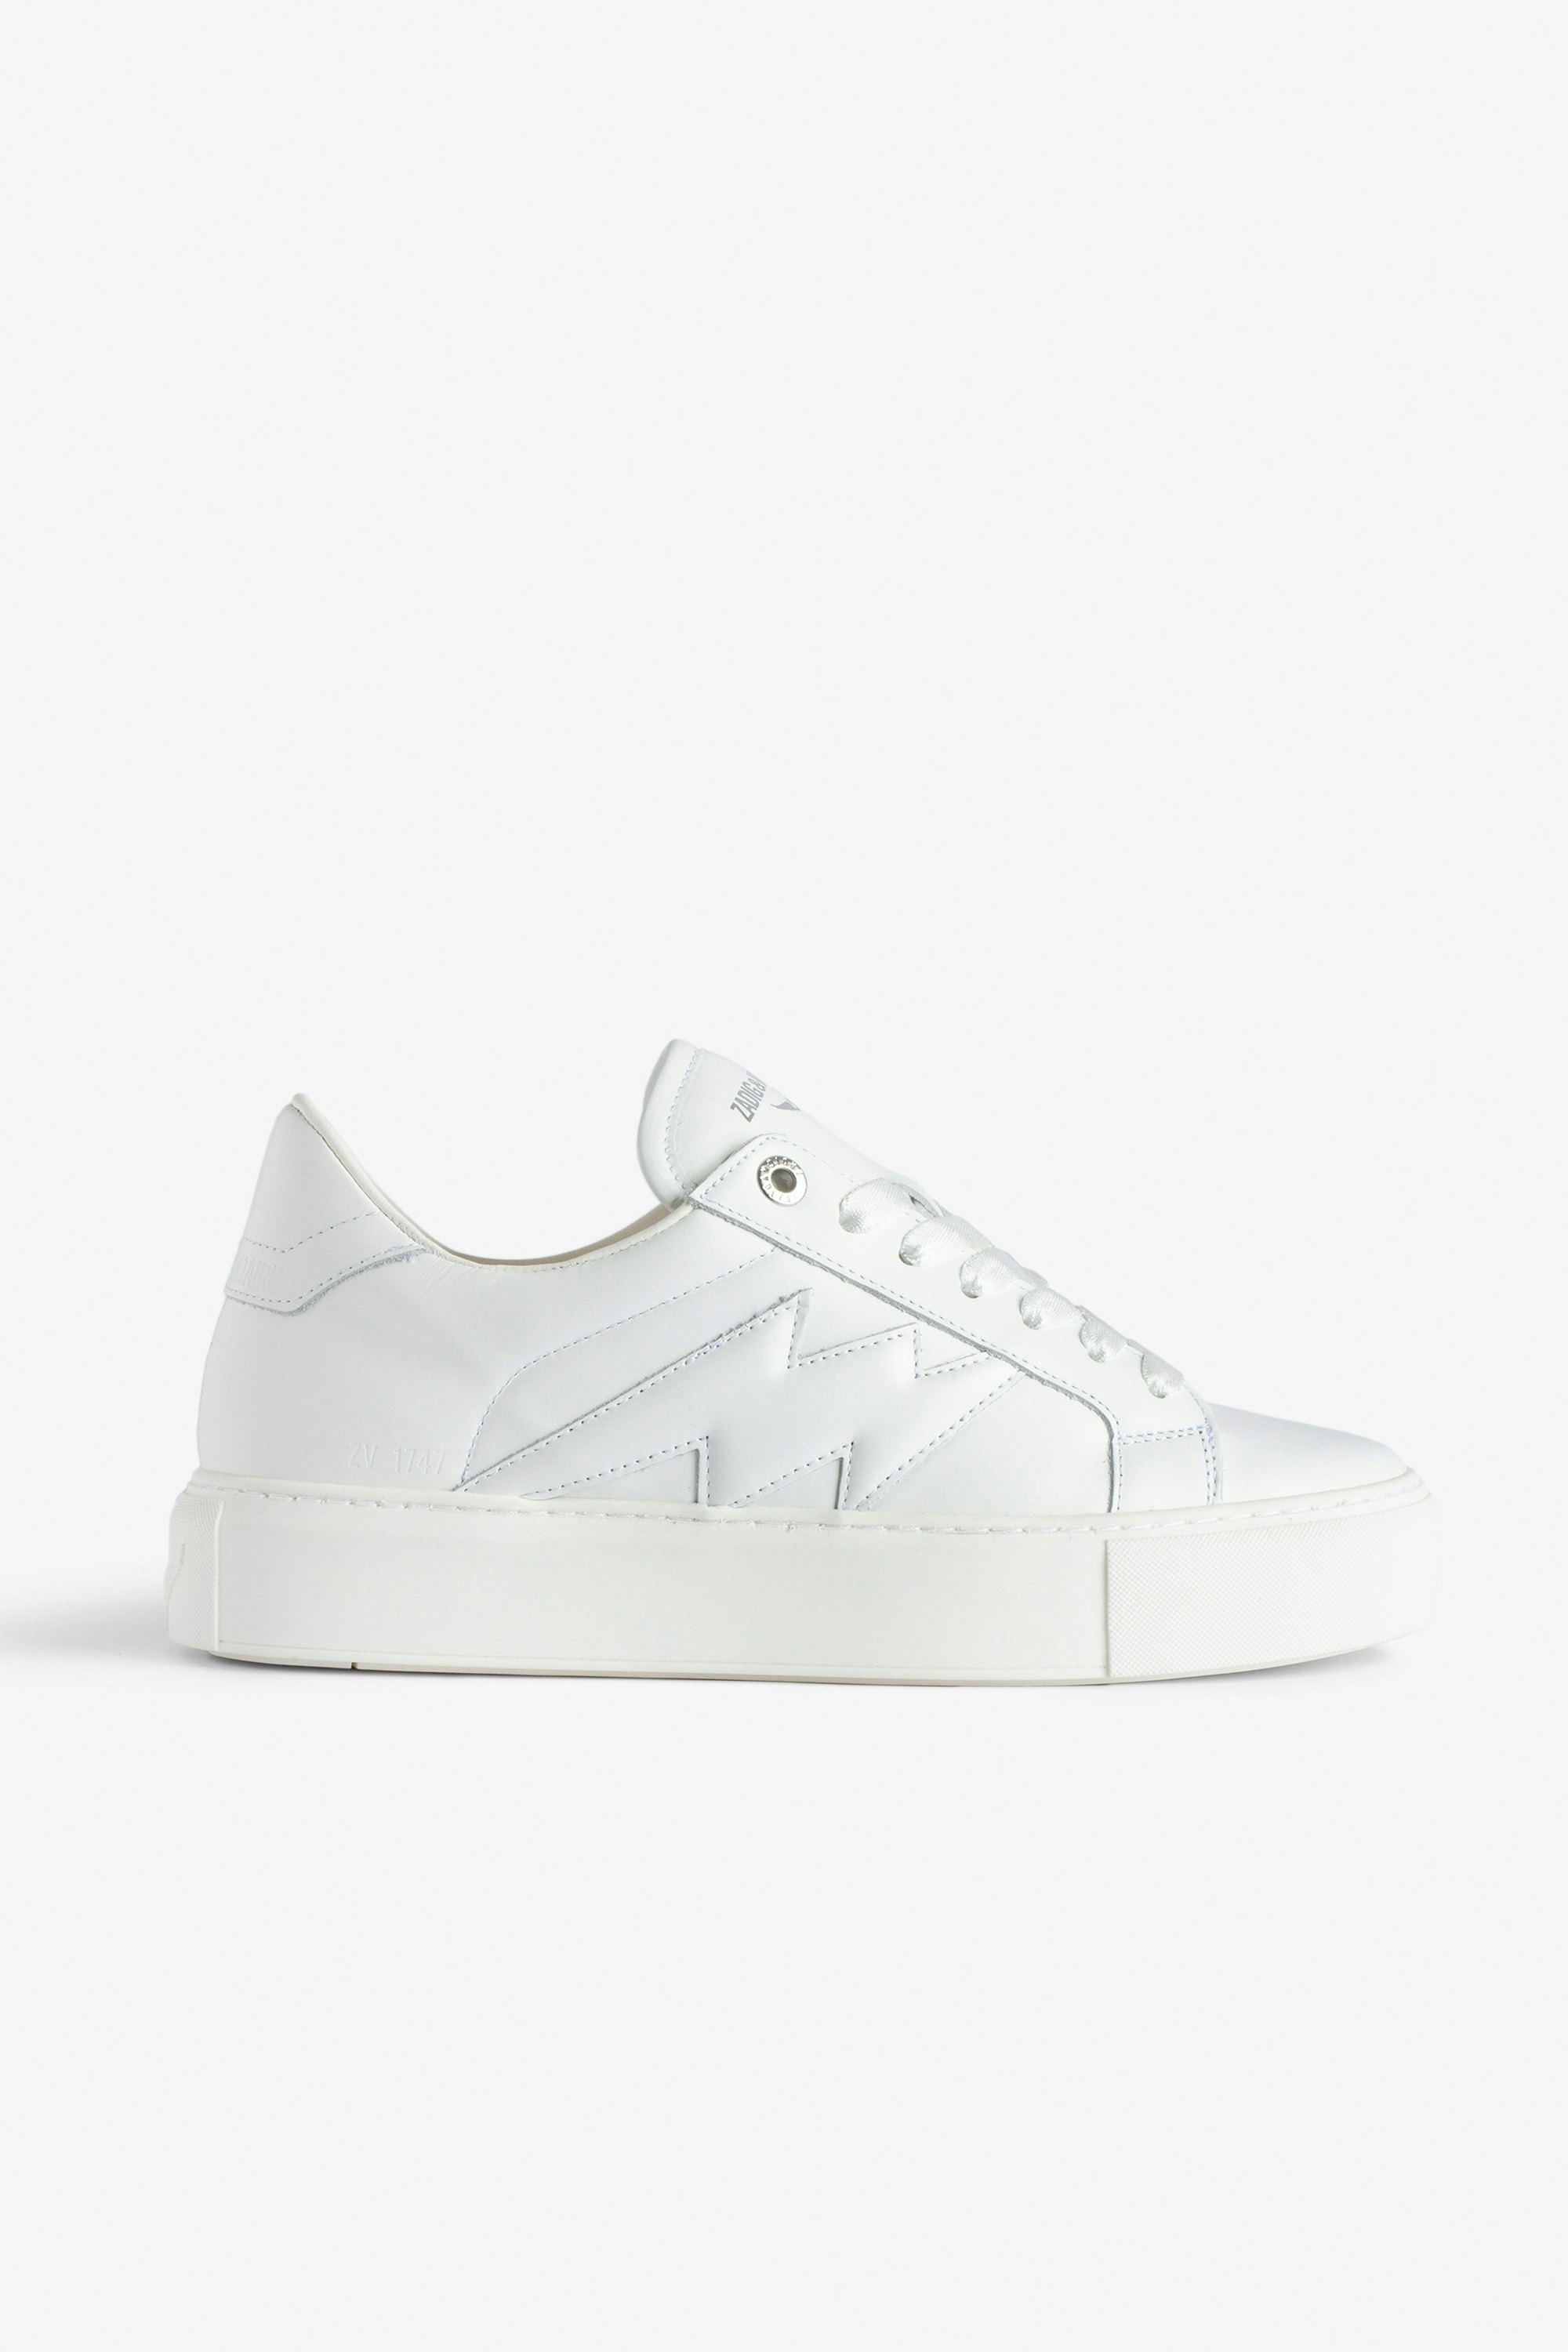 ZV1747 La Flash Low-Top Platform Trainers - Women’s white smooth leather low-top trainers with lightning bolt panels and chunky sole.